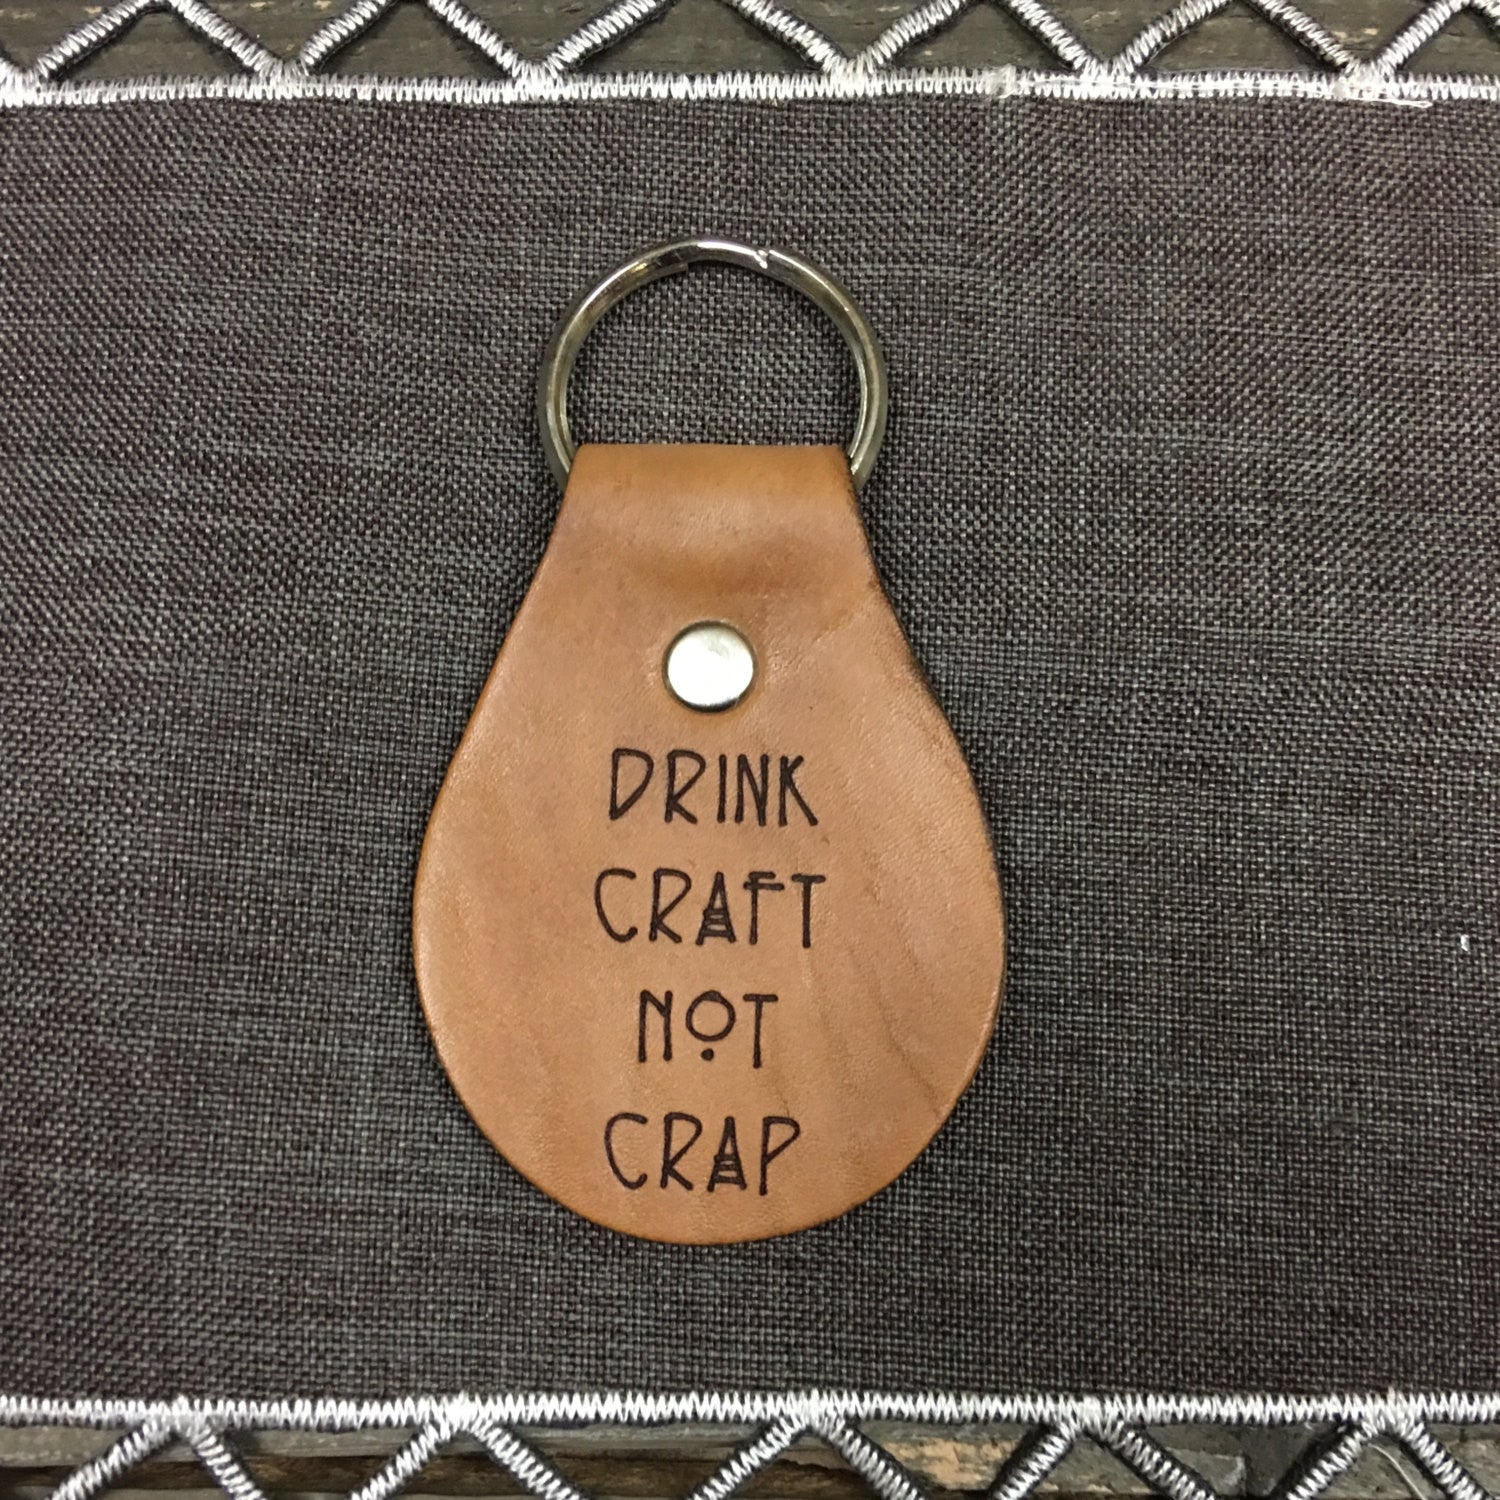 Drink Craft Not Crap Chain Fob Keychain - Laser Engraved Brown Tan Leather